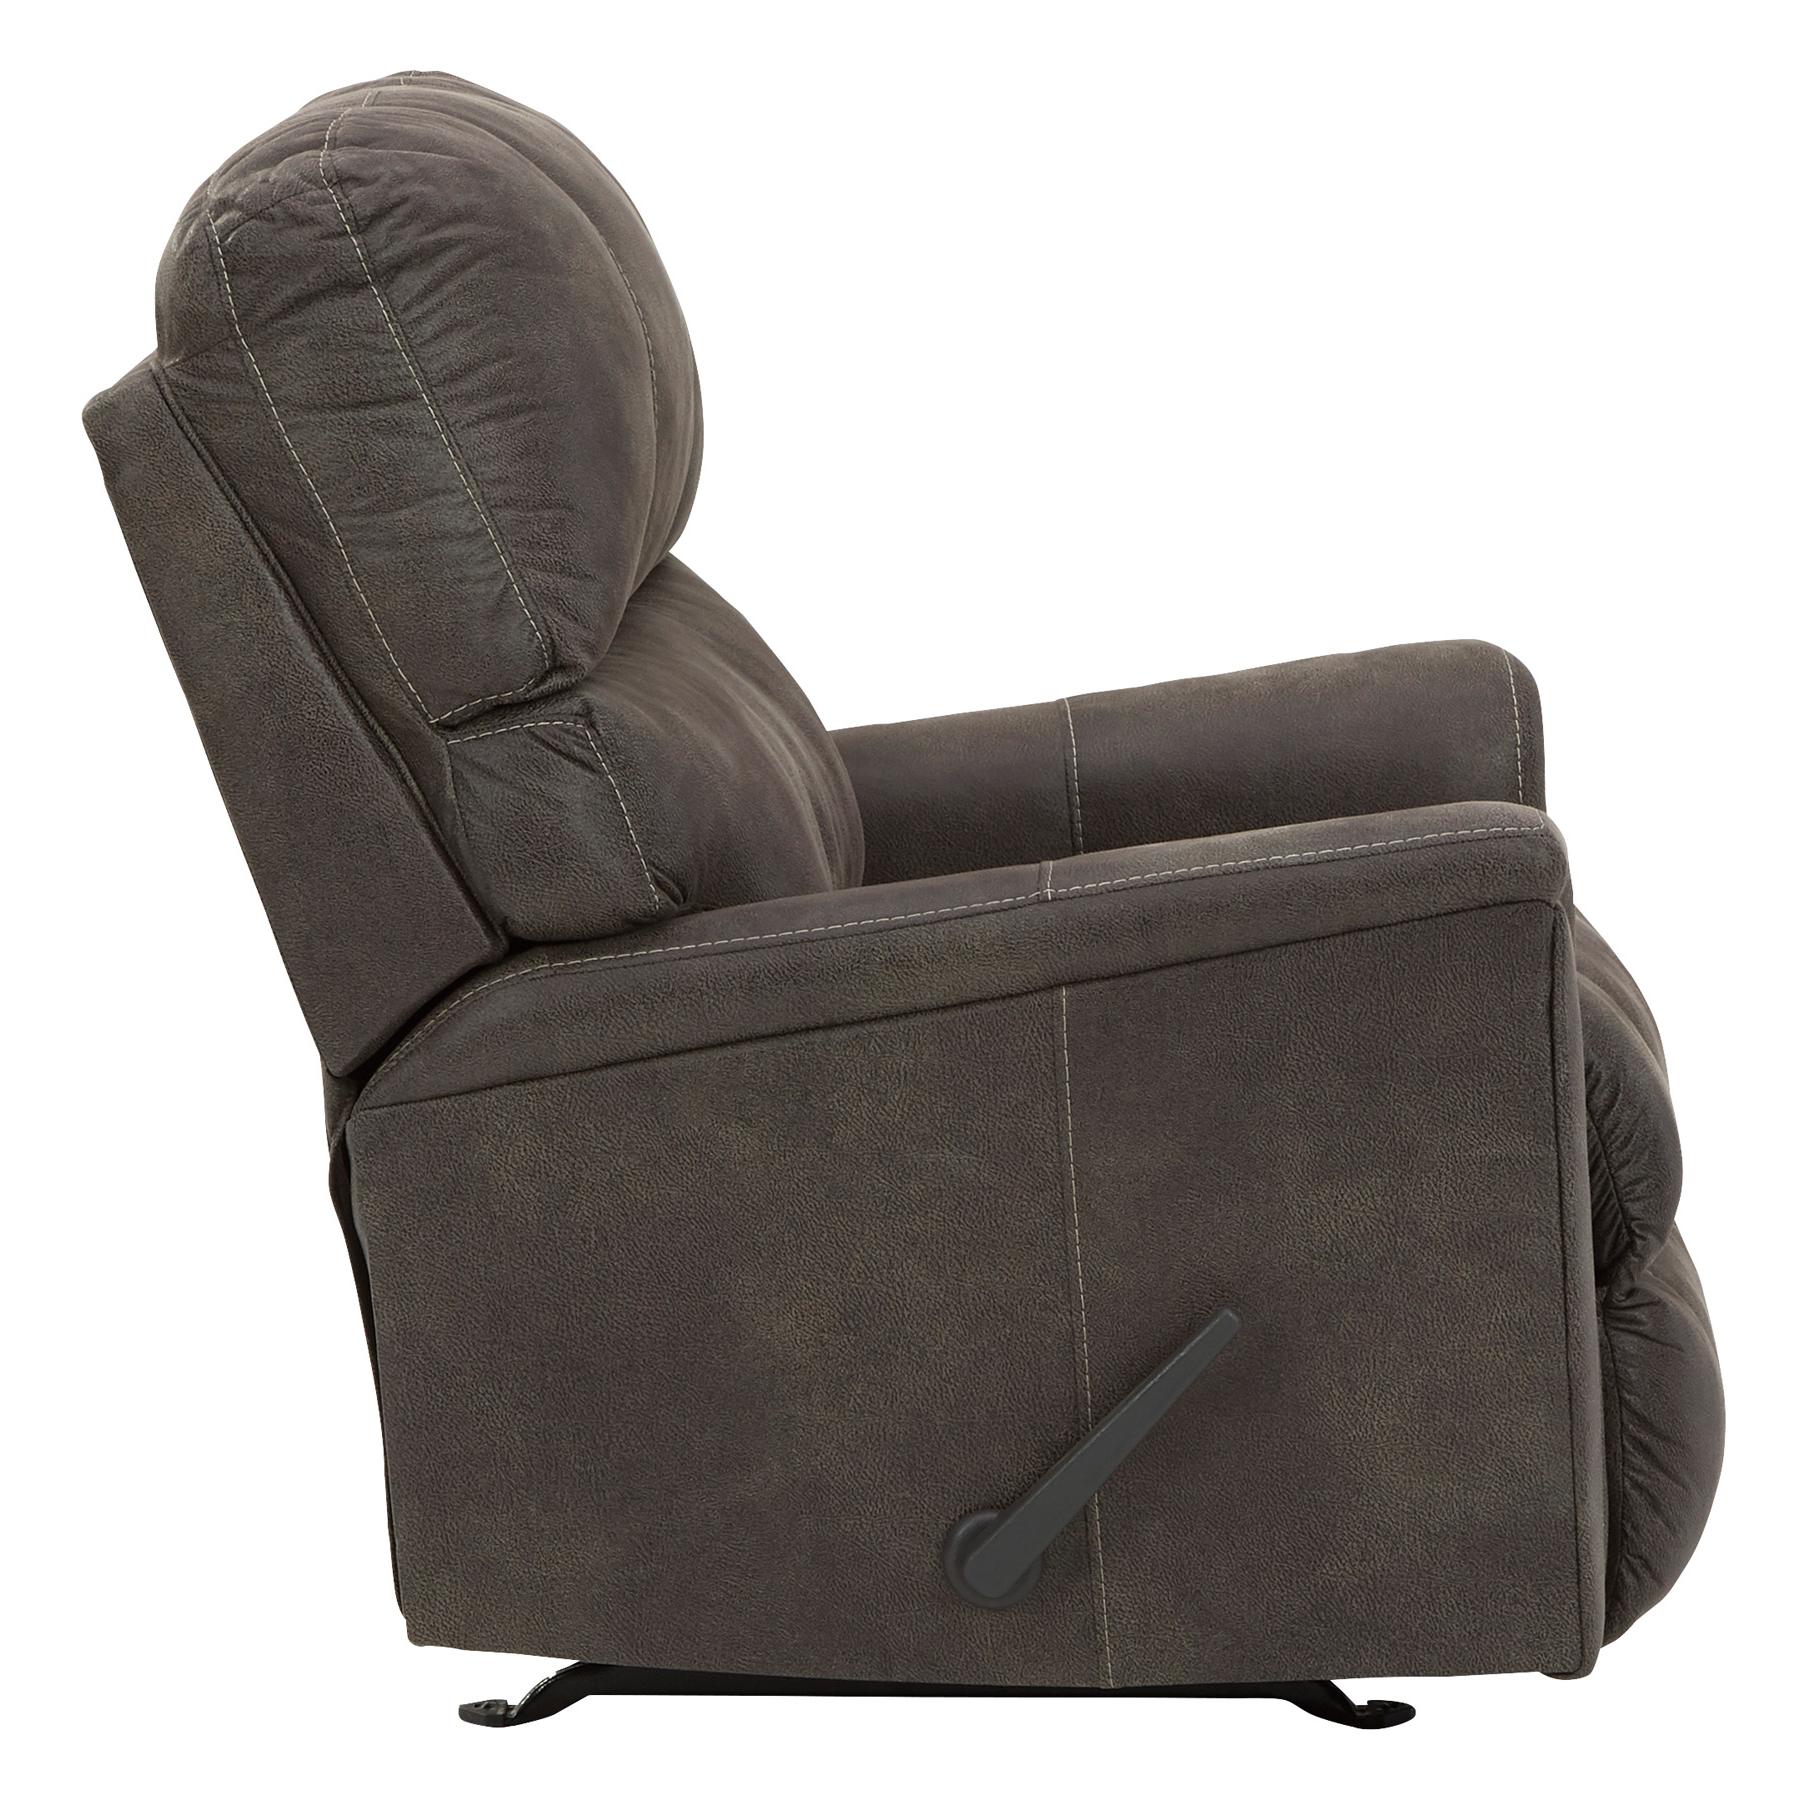 Signature Design by Ashley Navi Rocker Leather Look Recliner 9400225 IMAGE 5